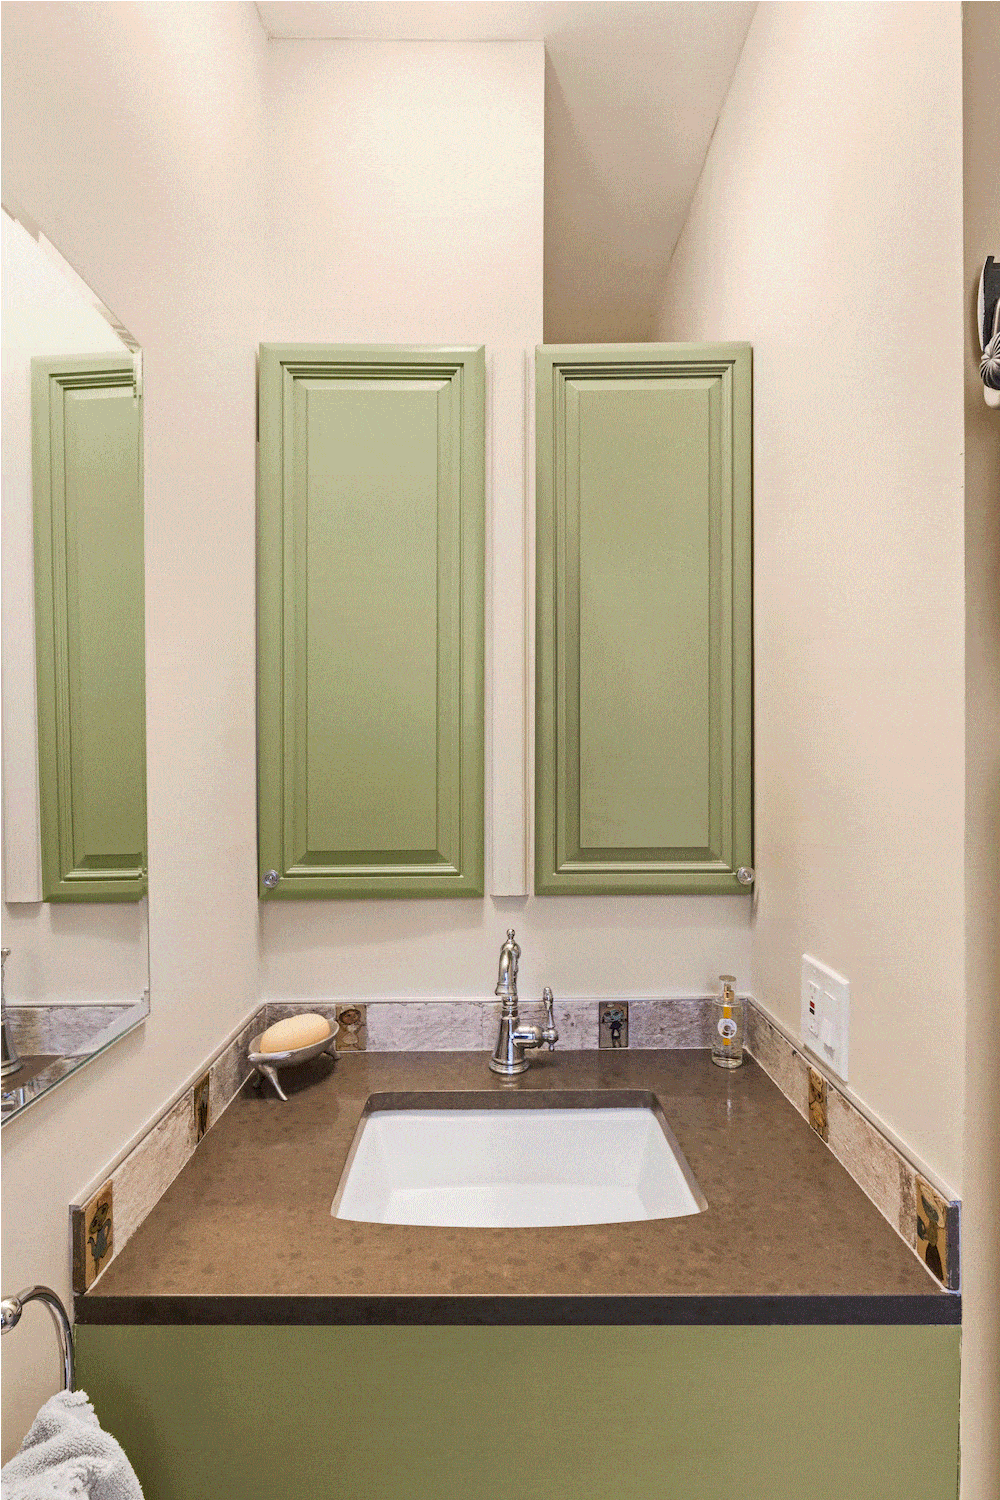 Green slide out shelves over an in built white sink and granite countertop after renovation